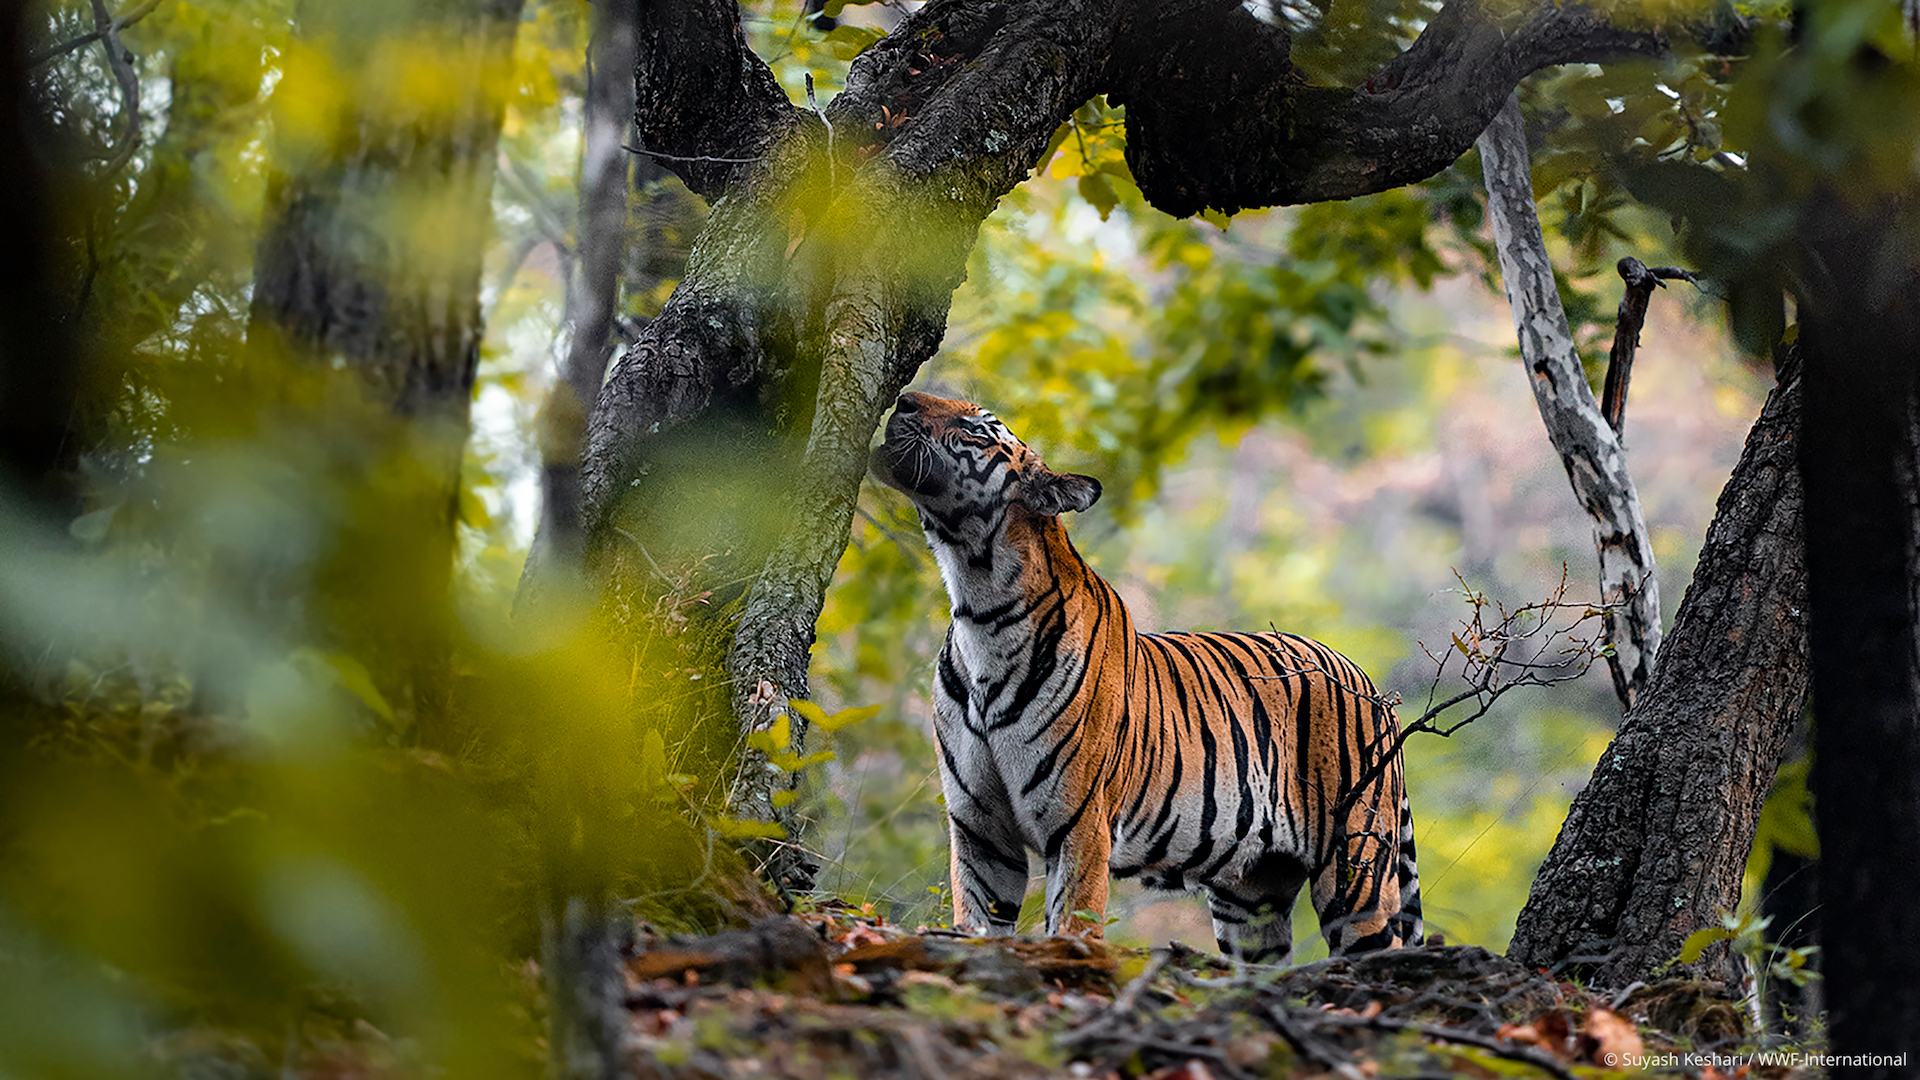 How do tigers help protect forests?